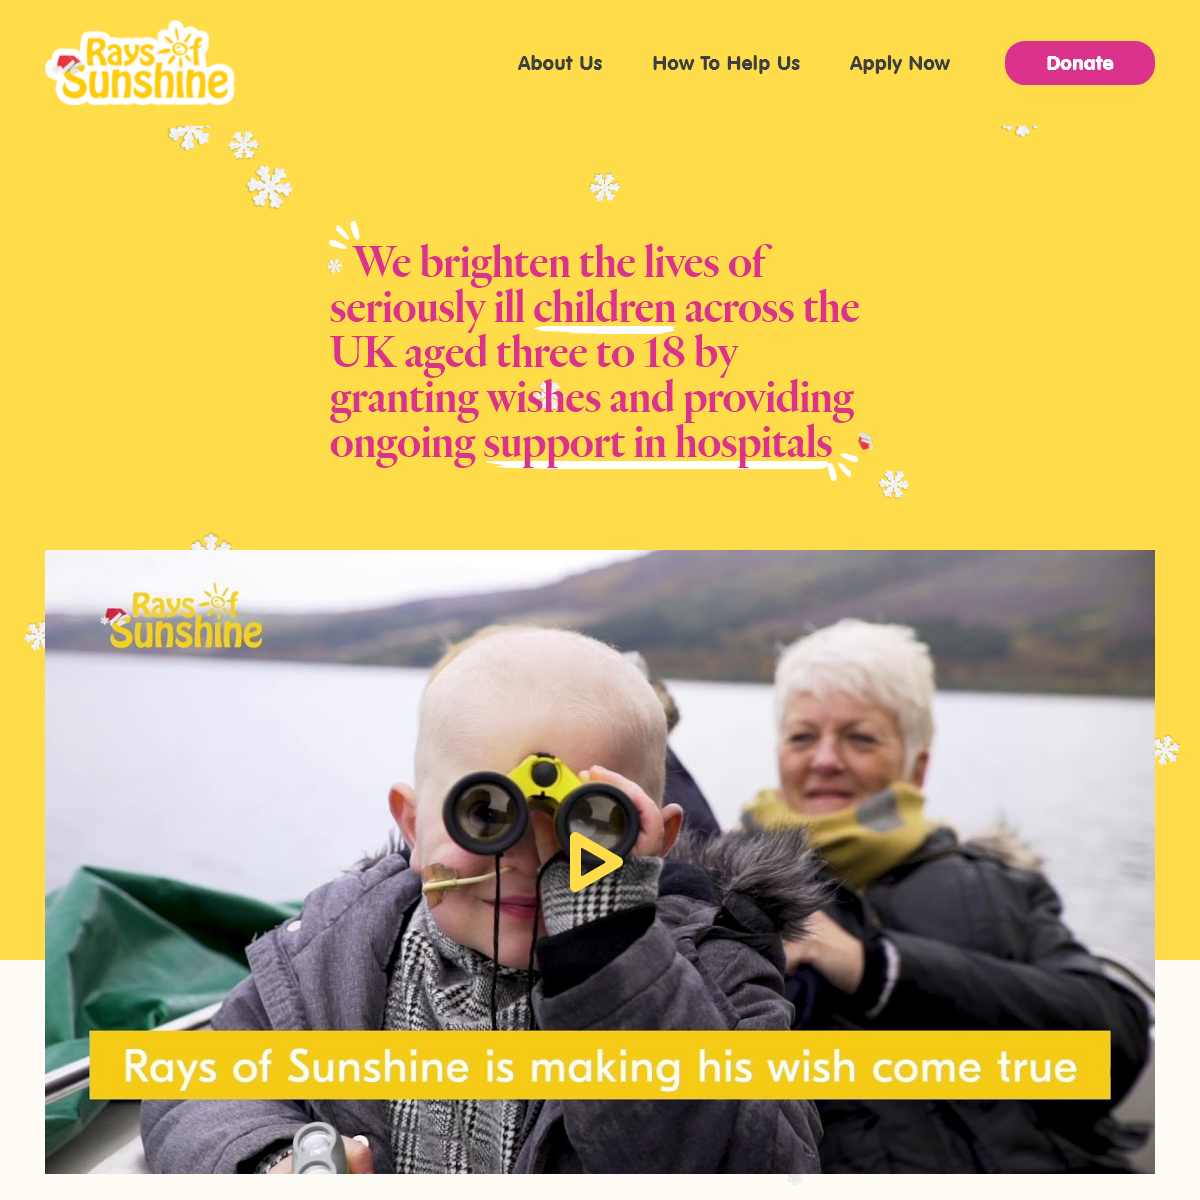 A complete backup of raysofsunshine.org.uk